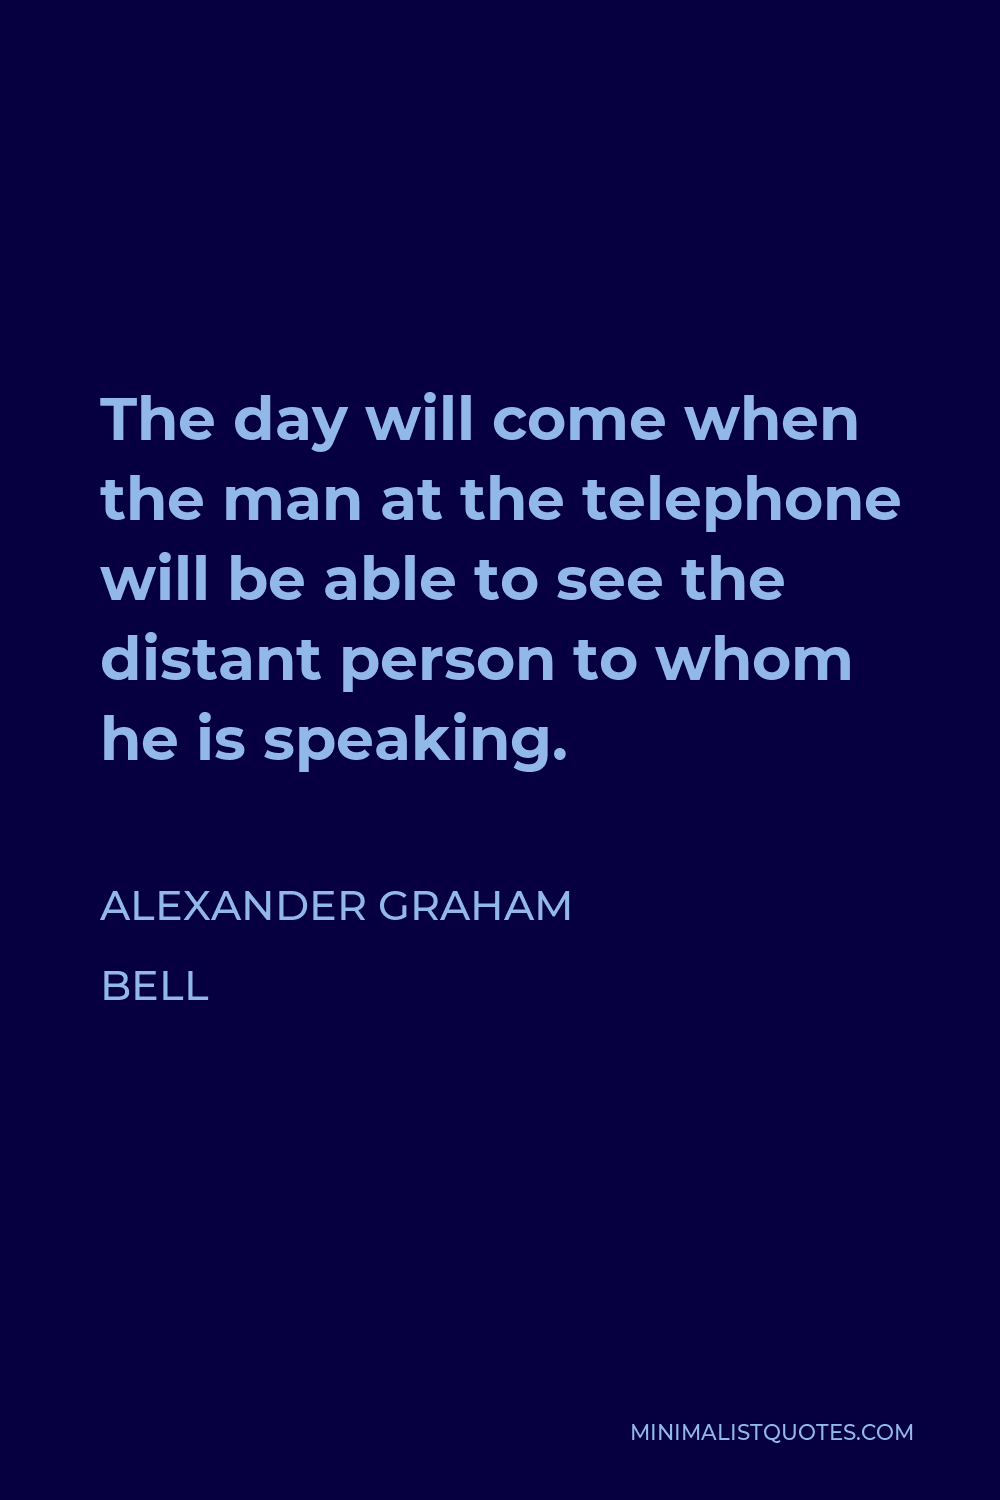 Alexander Graham Bell Quote - The day will come when the man at the telephone will be able to see the distant person to whom he is speaking.